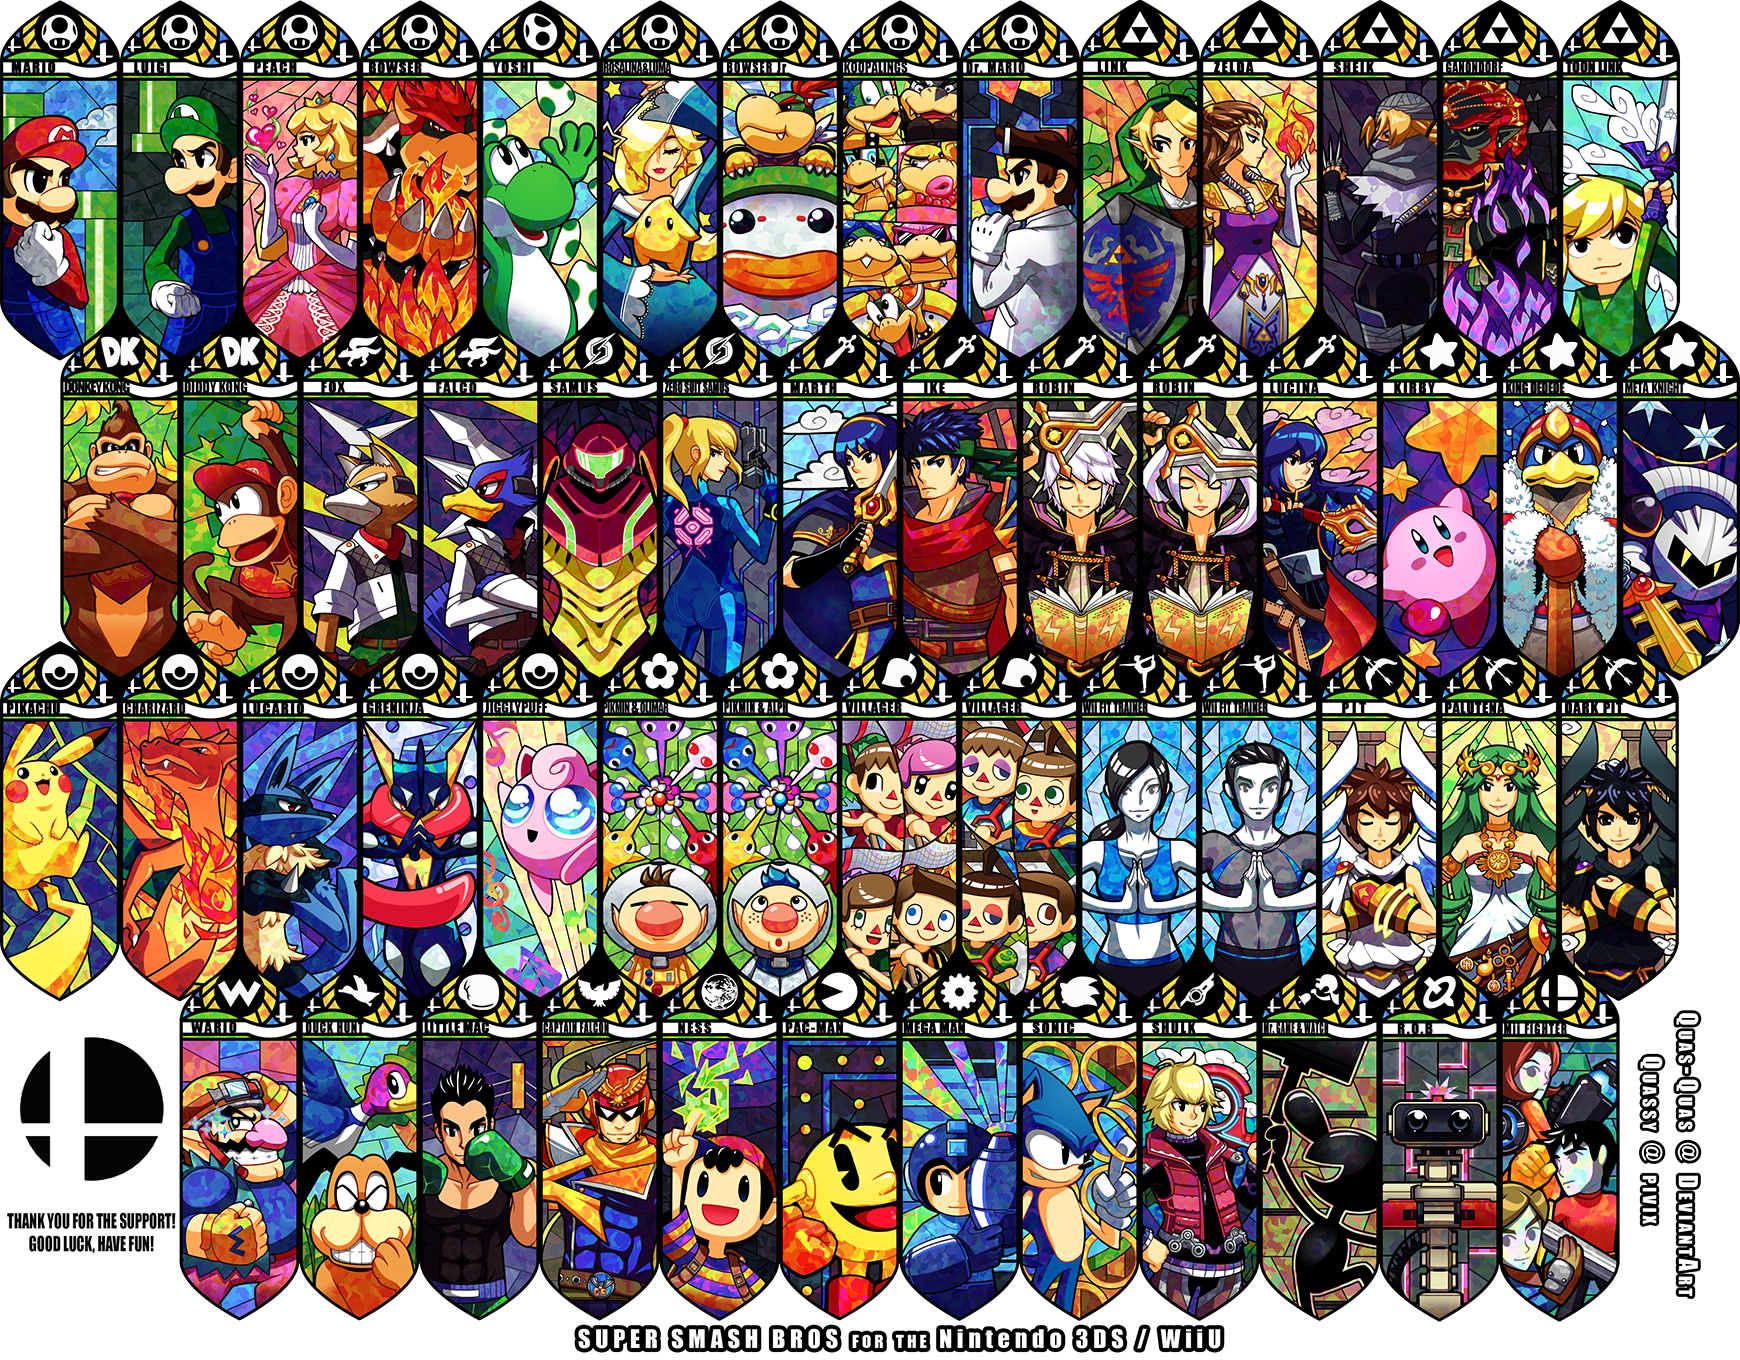 Anime 1740x1360 Super Smash Brothers video game characters anime collage colorful video games anime games